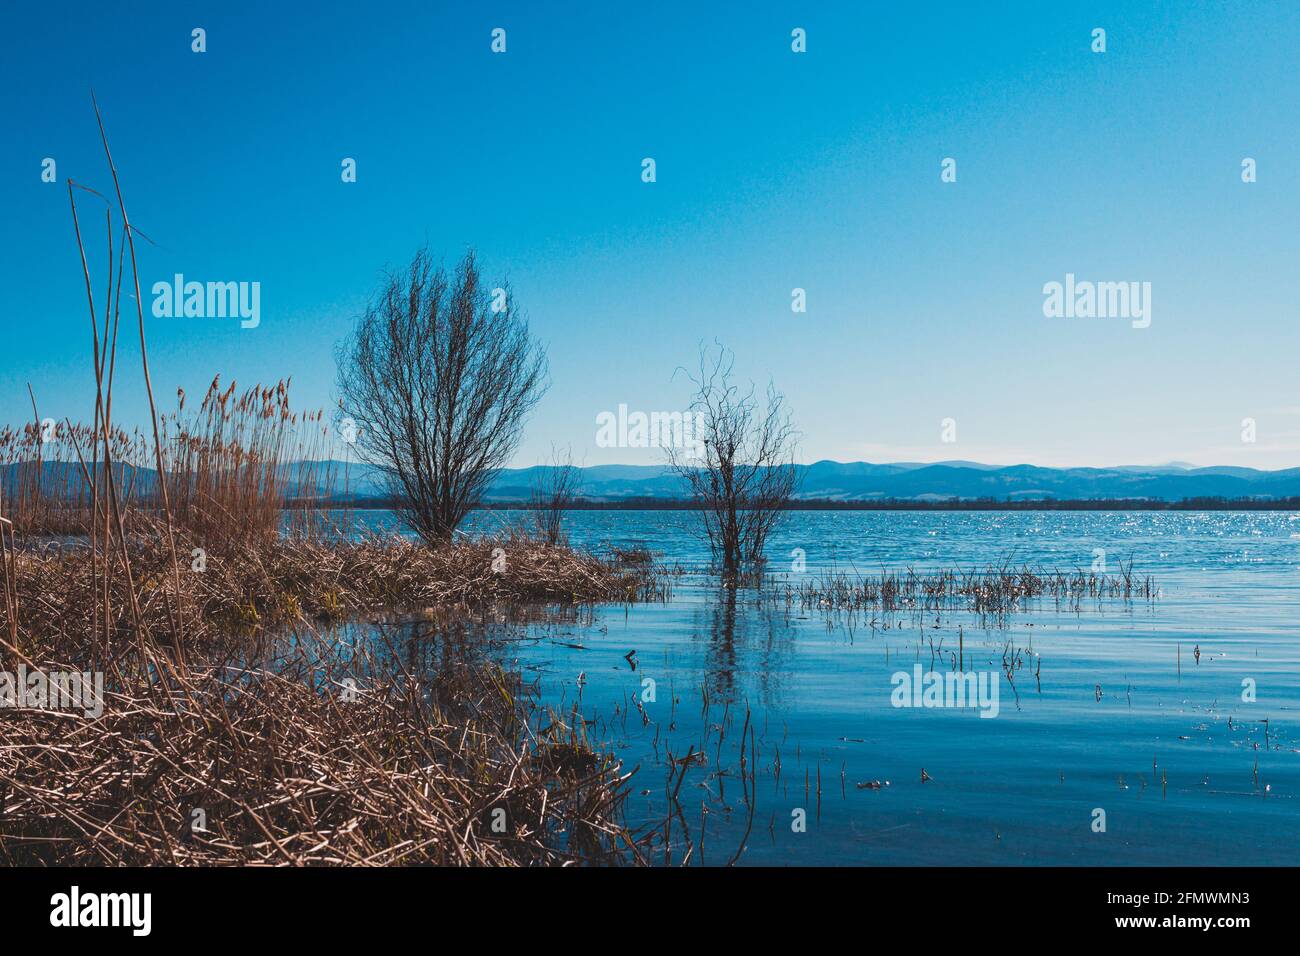 Tree growing in the lake with mountains in the background Stock Photo